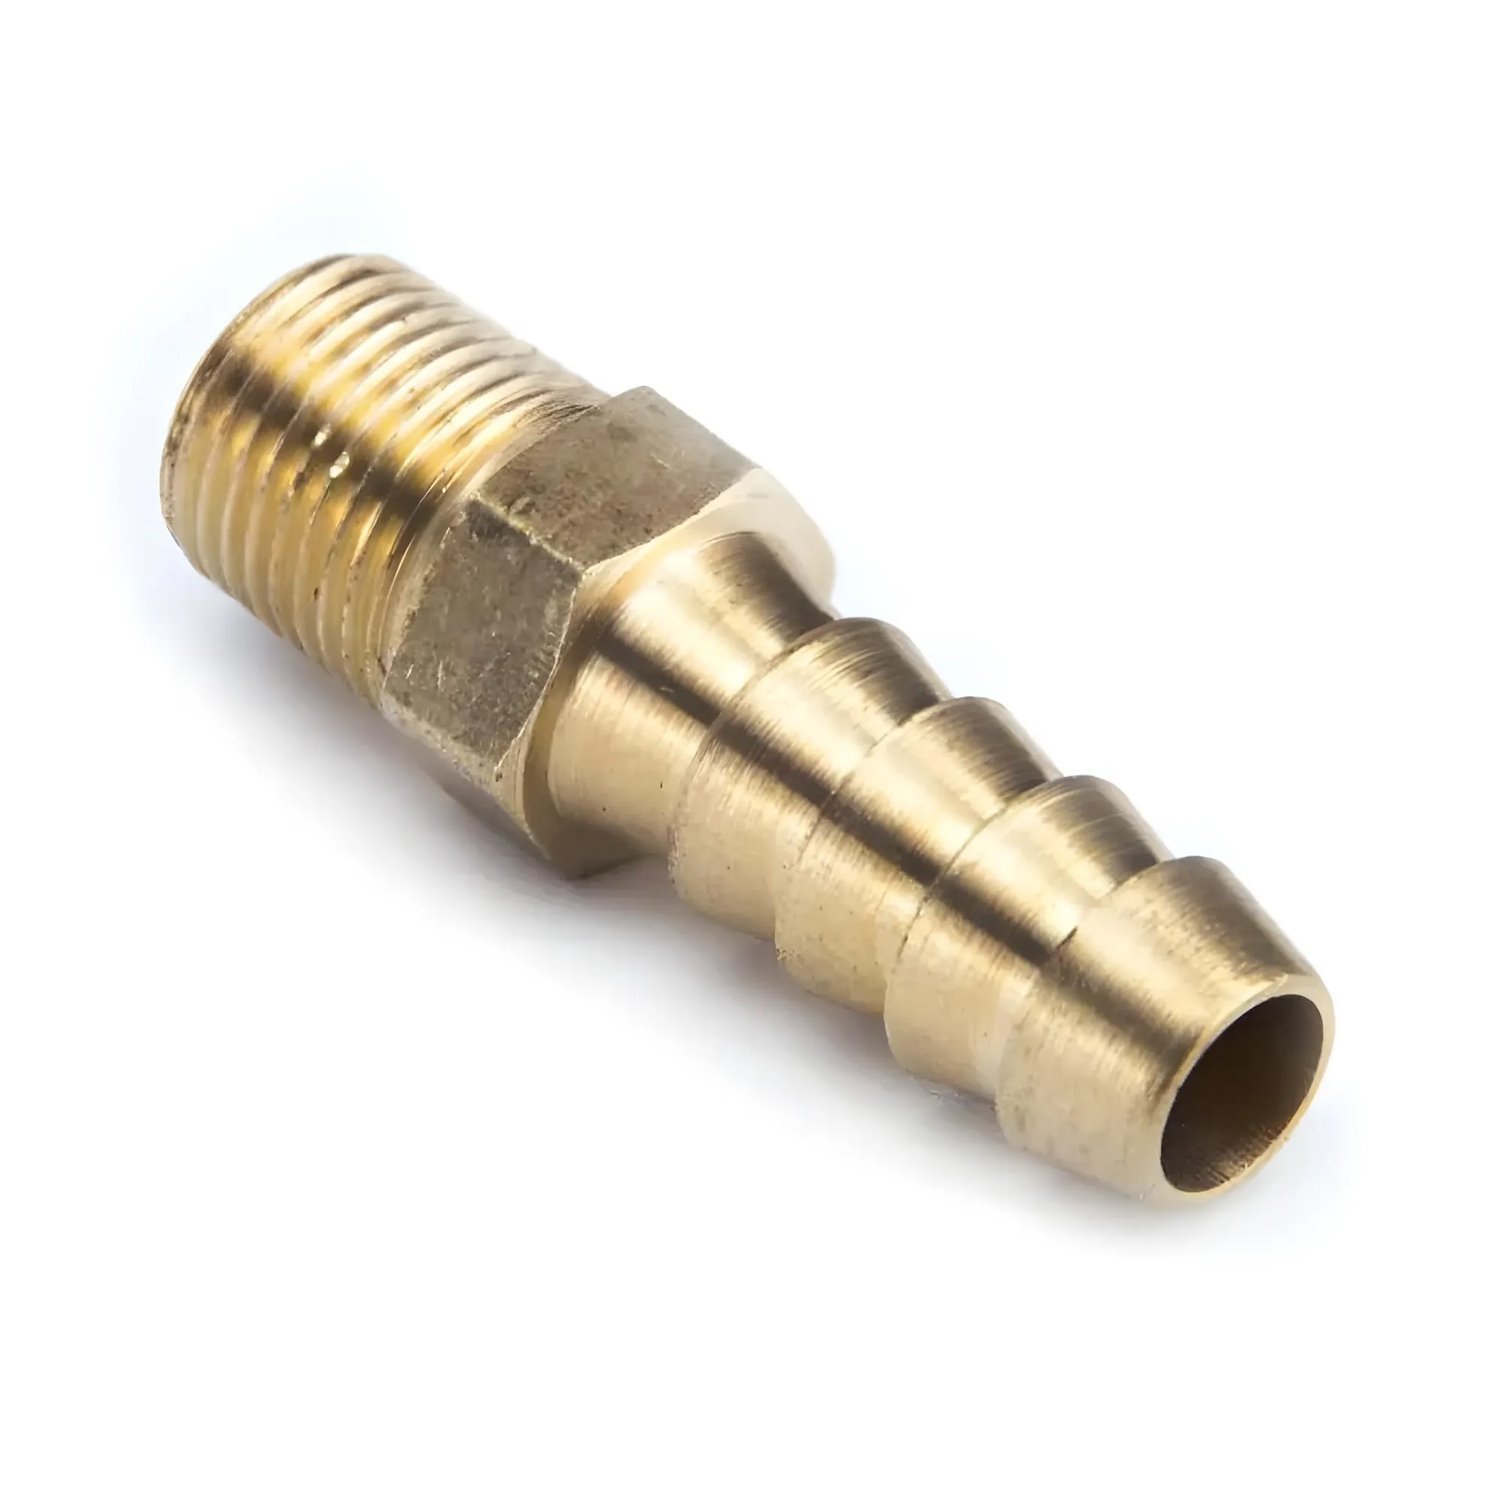 00-01920-B 1/8 in. NPT x 5/16 in. Straight Hose Barb Fitting, Male/Male